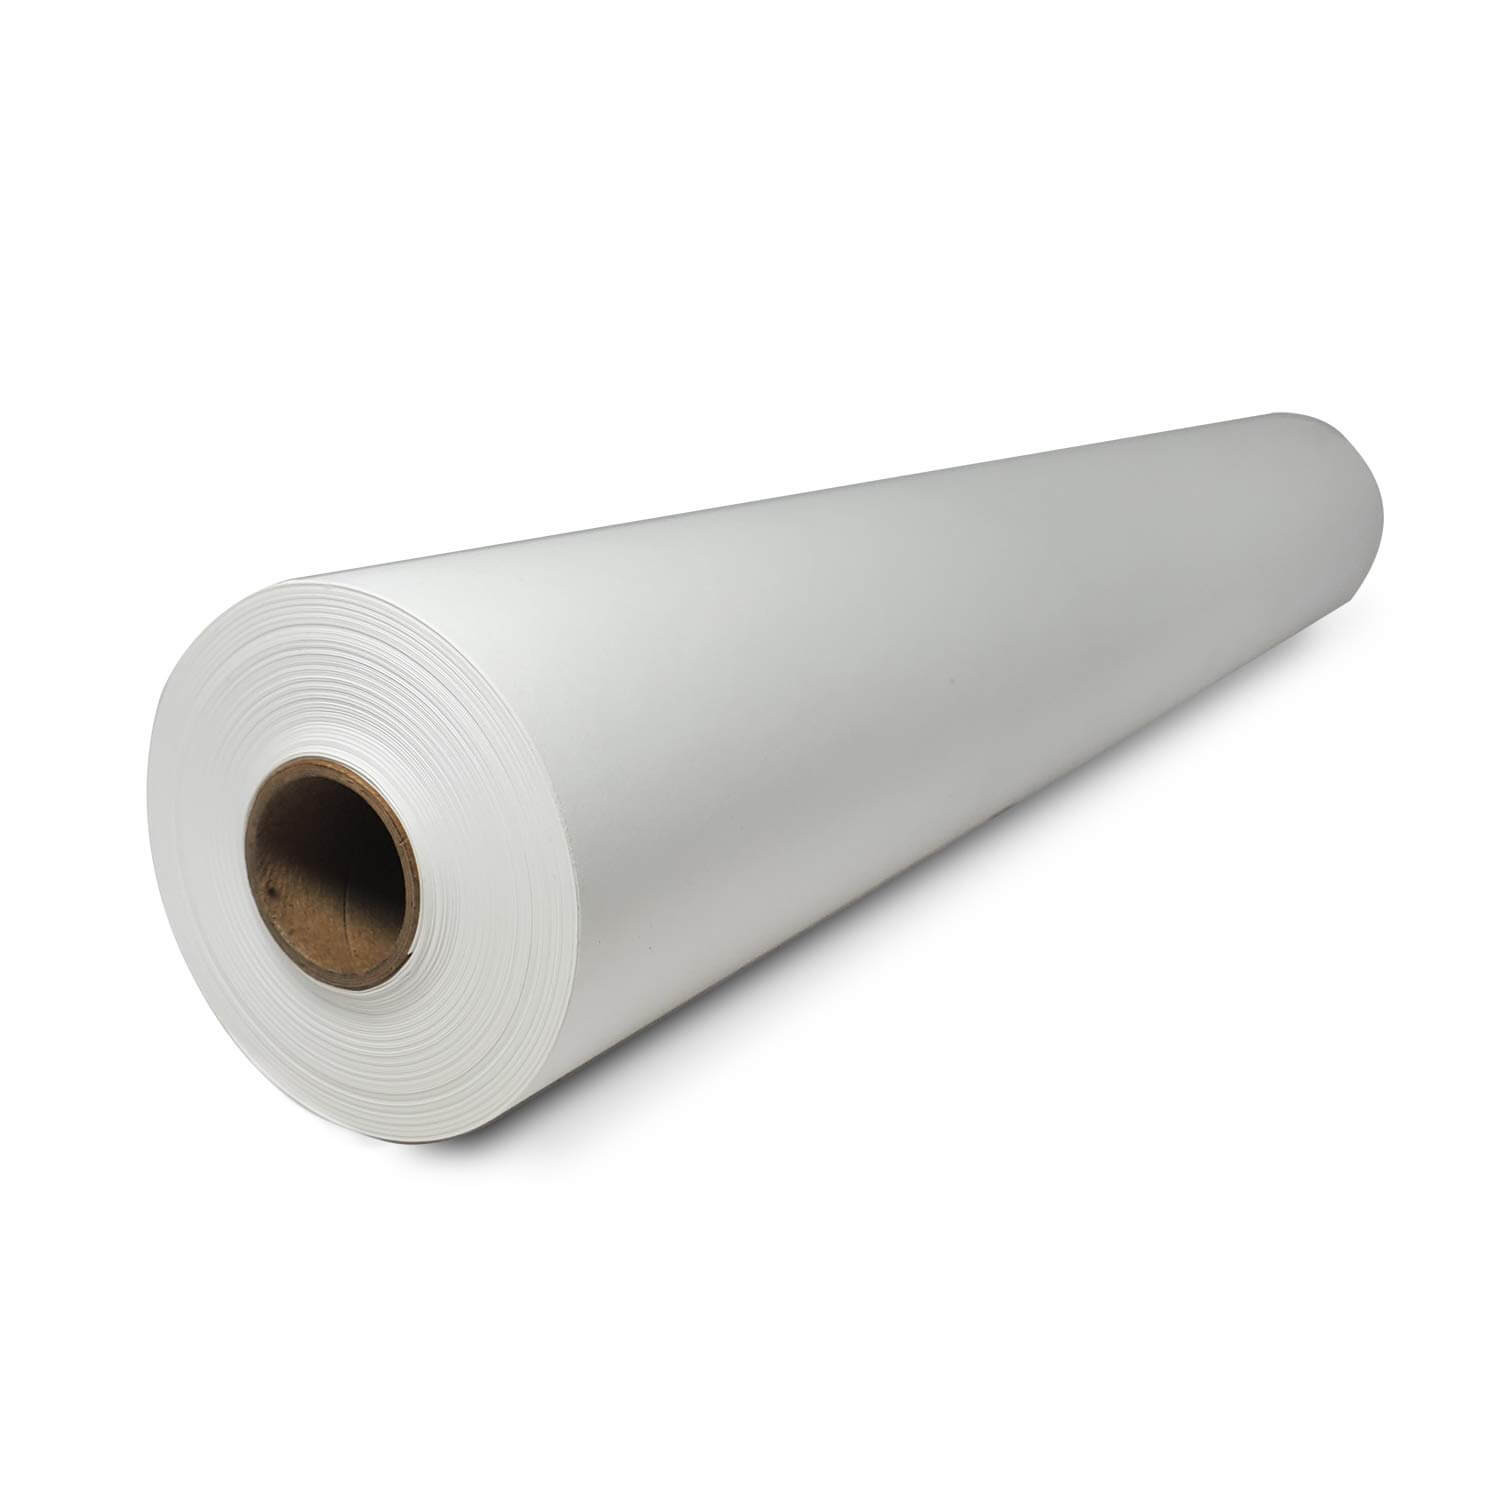 18 x 1000' White Butcher Paper Roll for Wrapping Meat and Fish buy in  stock in U.S. in IDL Packaging